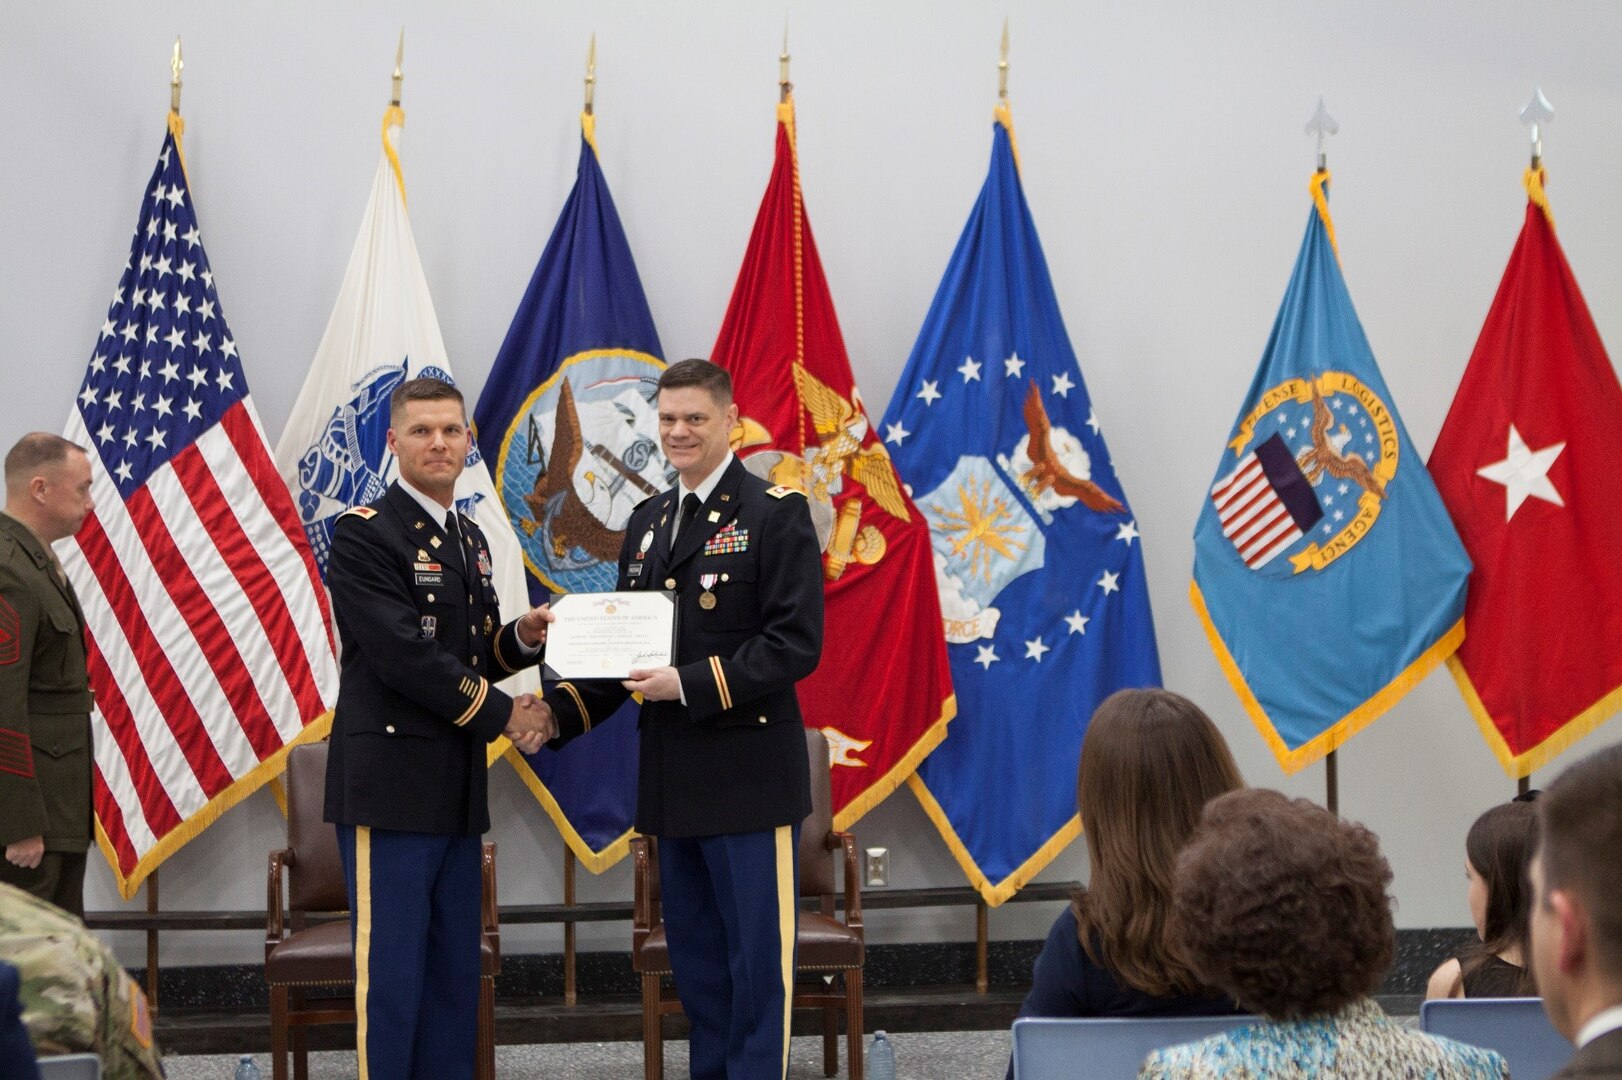 Army Col. Brad Eungard presented Army Lt. Col. Jacob H. Freeman with the Defense Meritorious Service Medal for his service at DLA Distribution, Susquehanna.